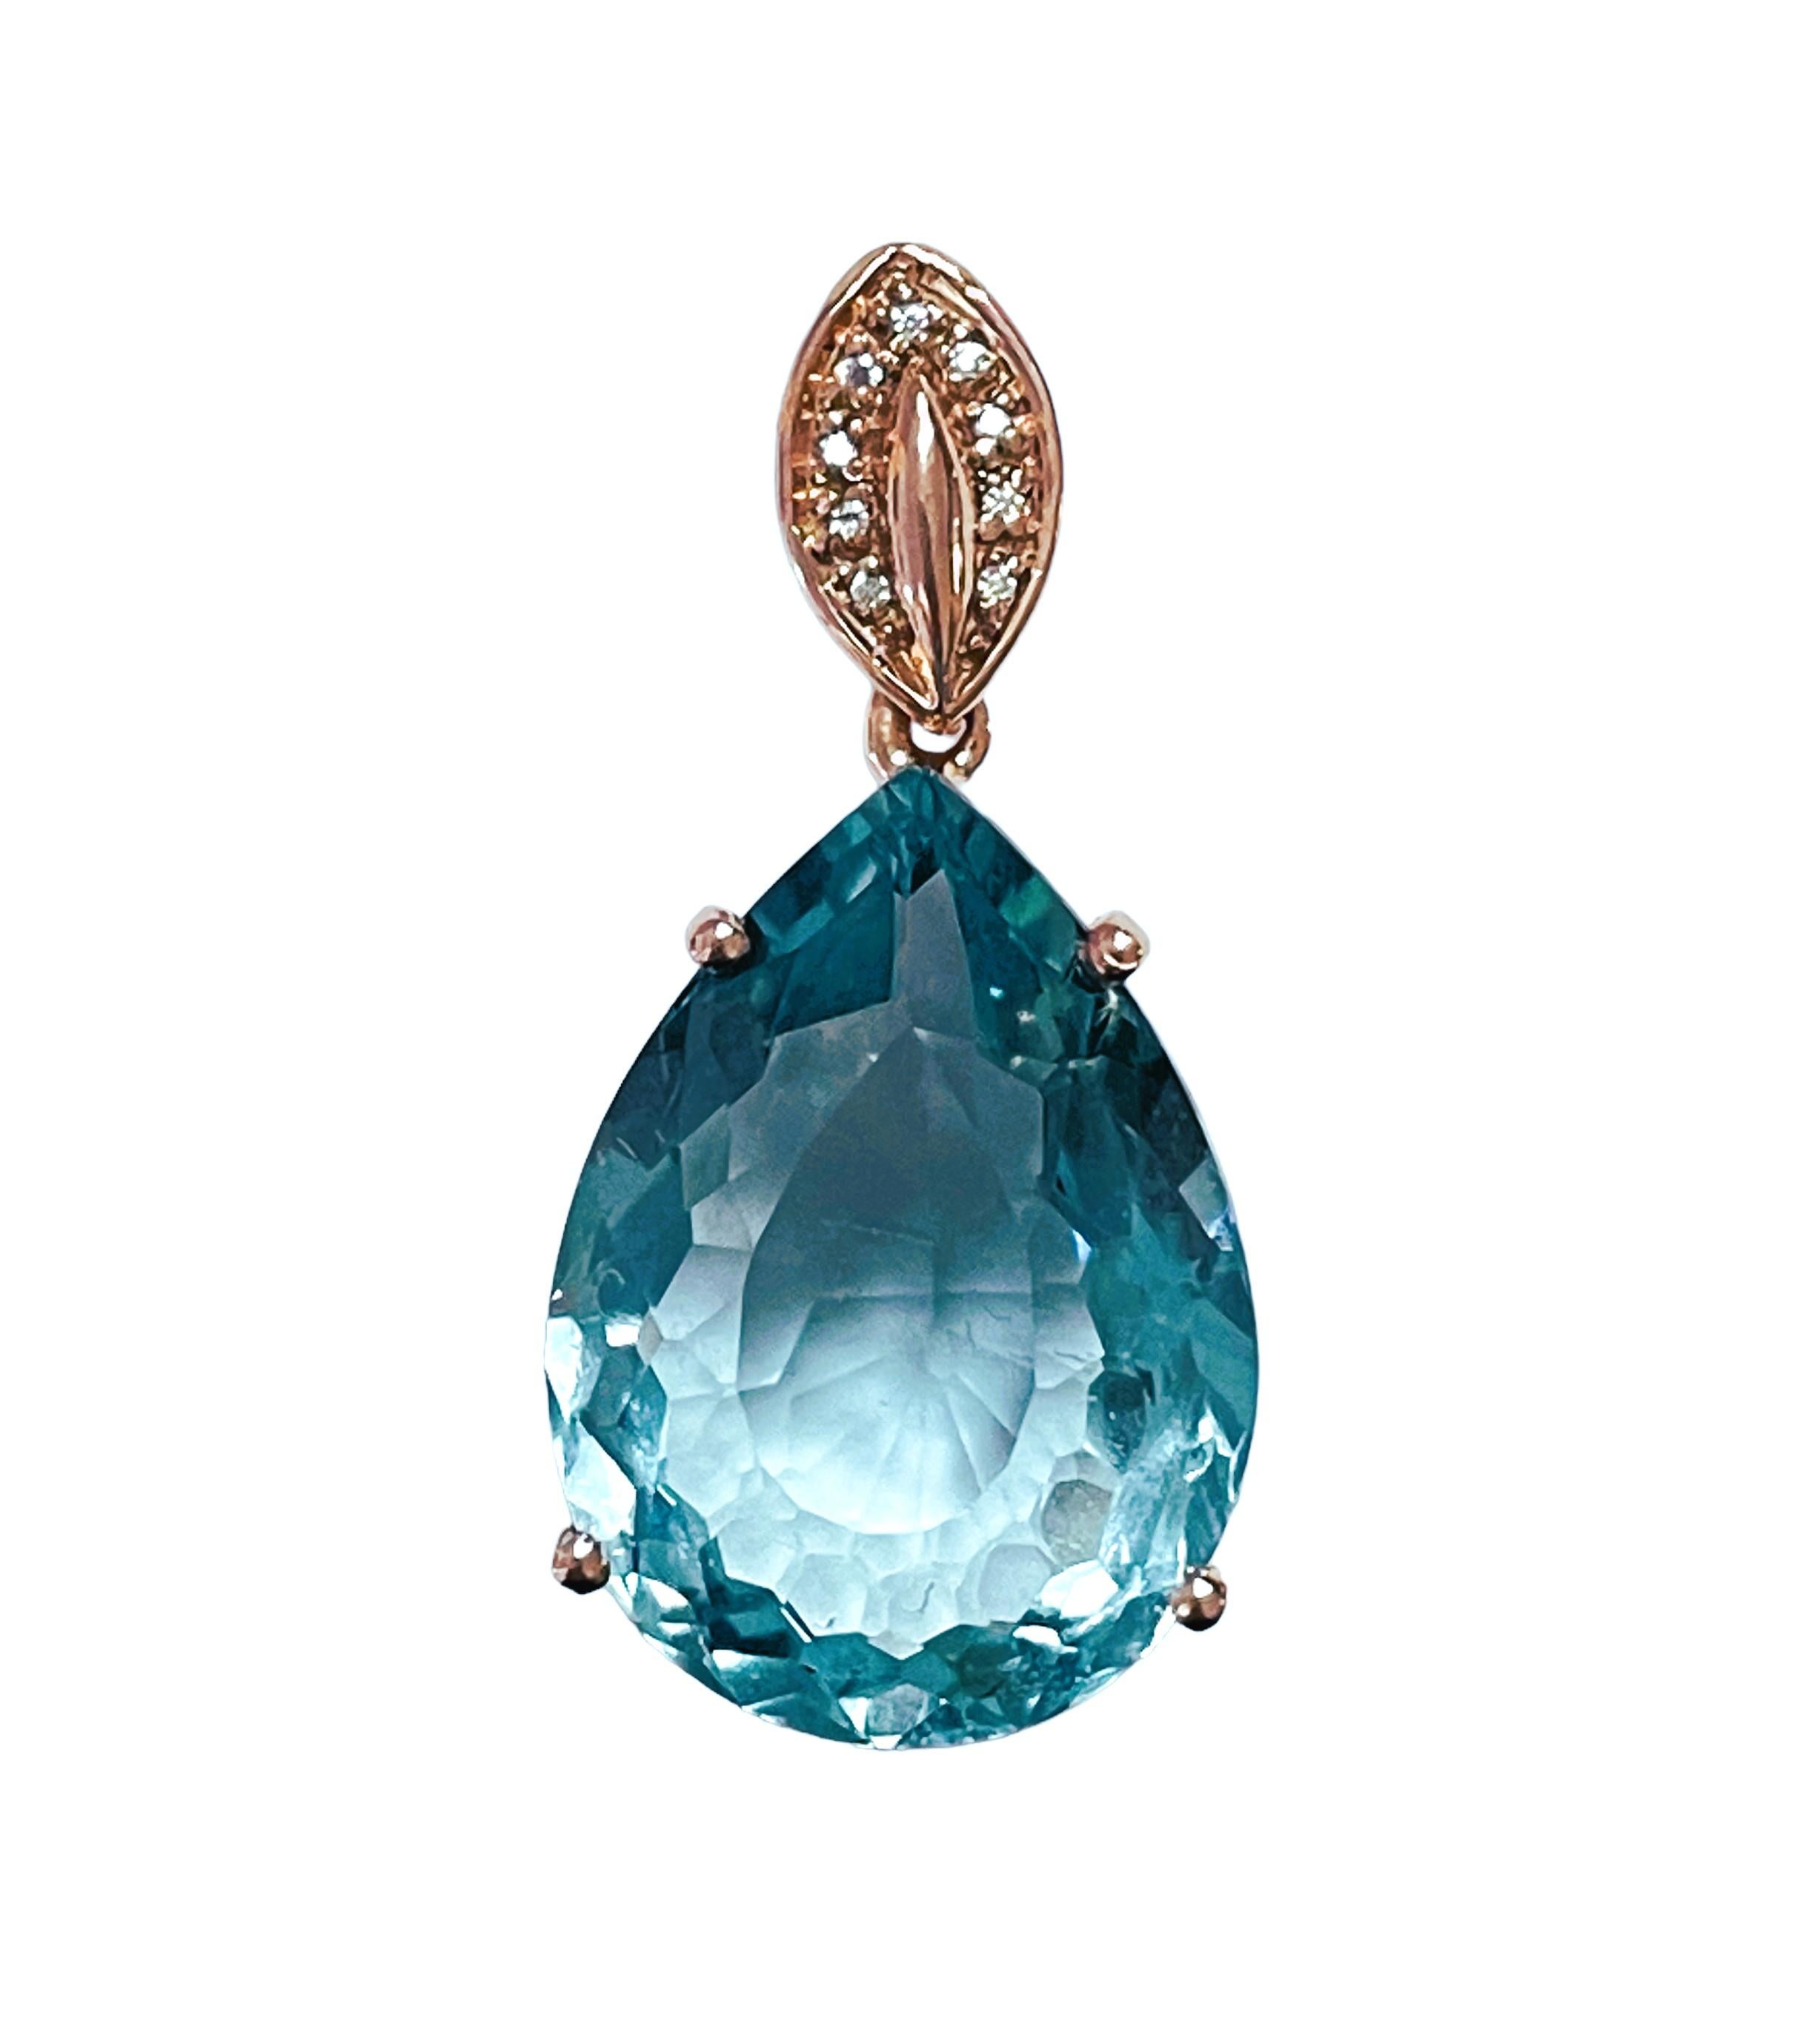 The Aquamarine stone was mined in Philippines and is just exquisite. It just shimmers and sparkles.   The 